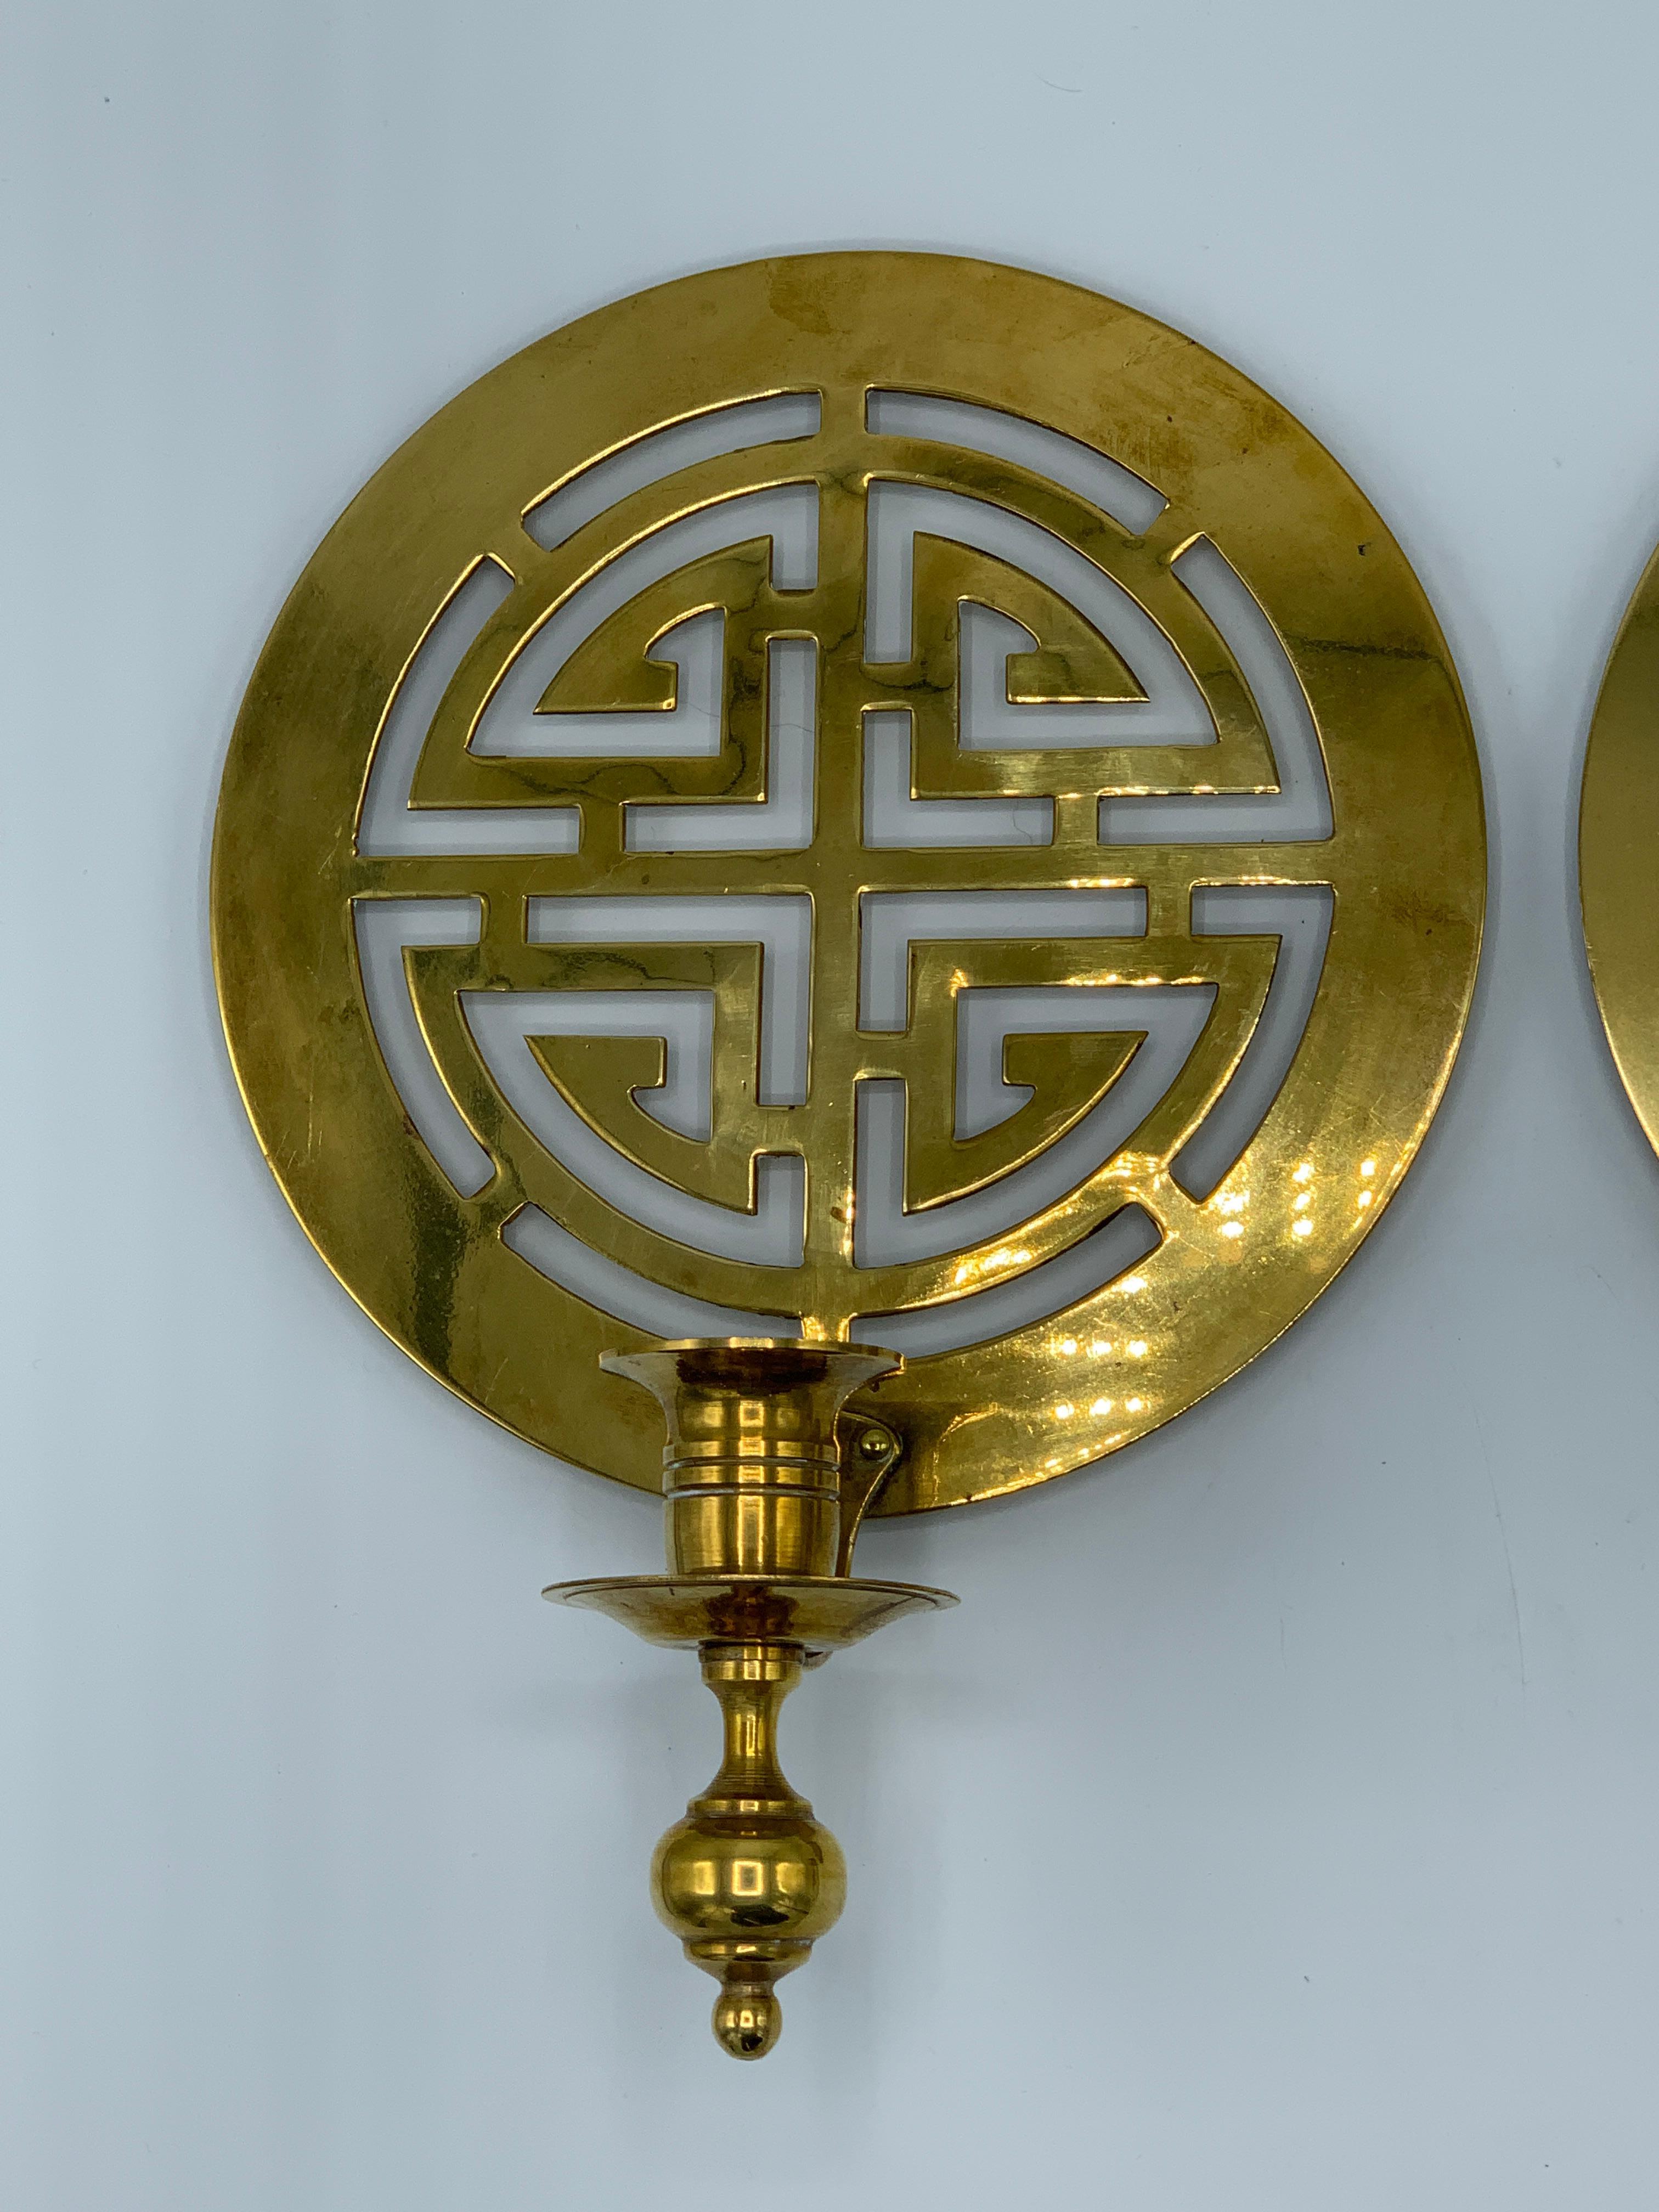 Offered is a gorgeous, pair of 1960s polished-brass chinoiserie candlestick wall sconces. The pair each has mounting hardware on the backside and could easily be professionally wired for electric use. Heavy, weighs 3.5lbs total for the pair.